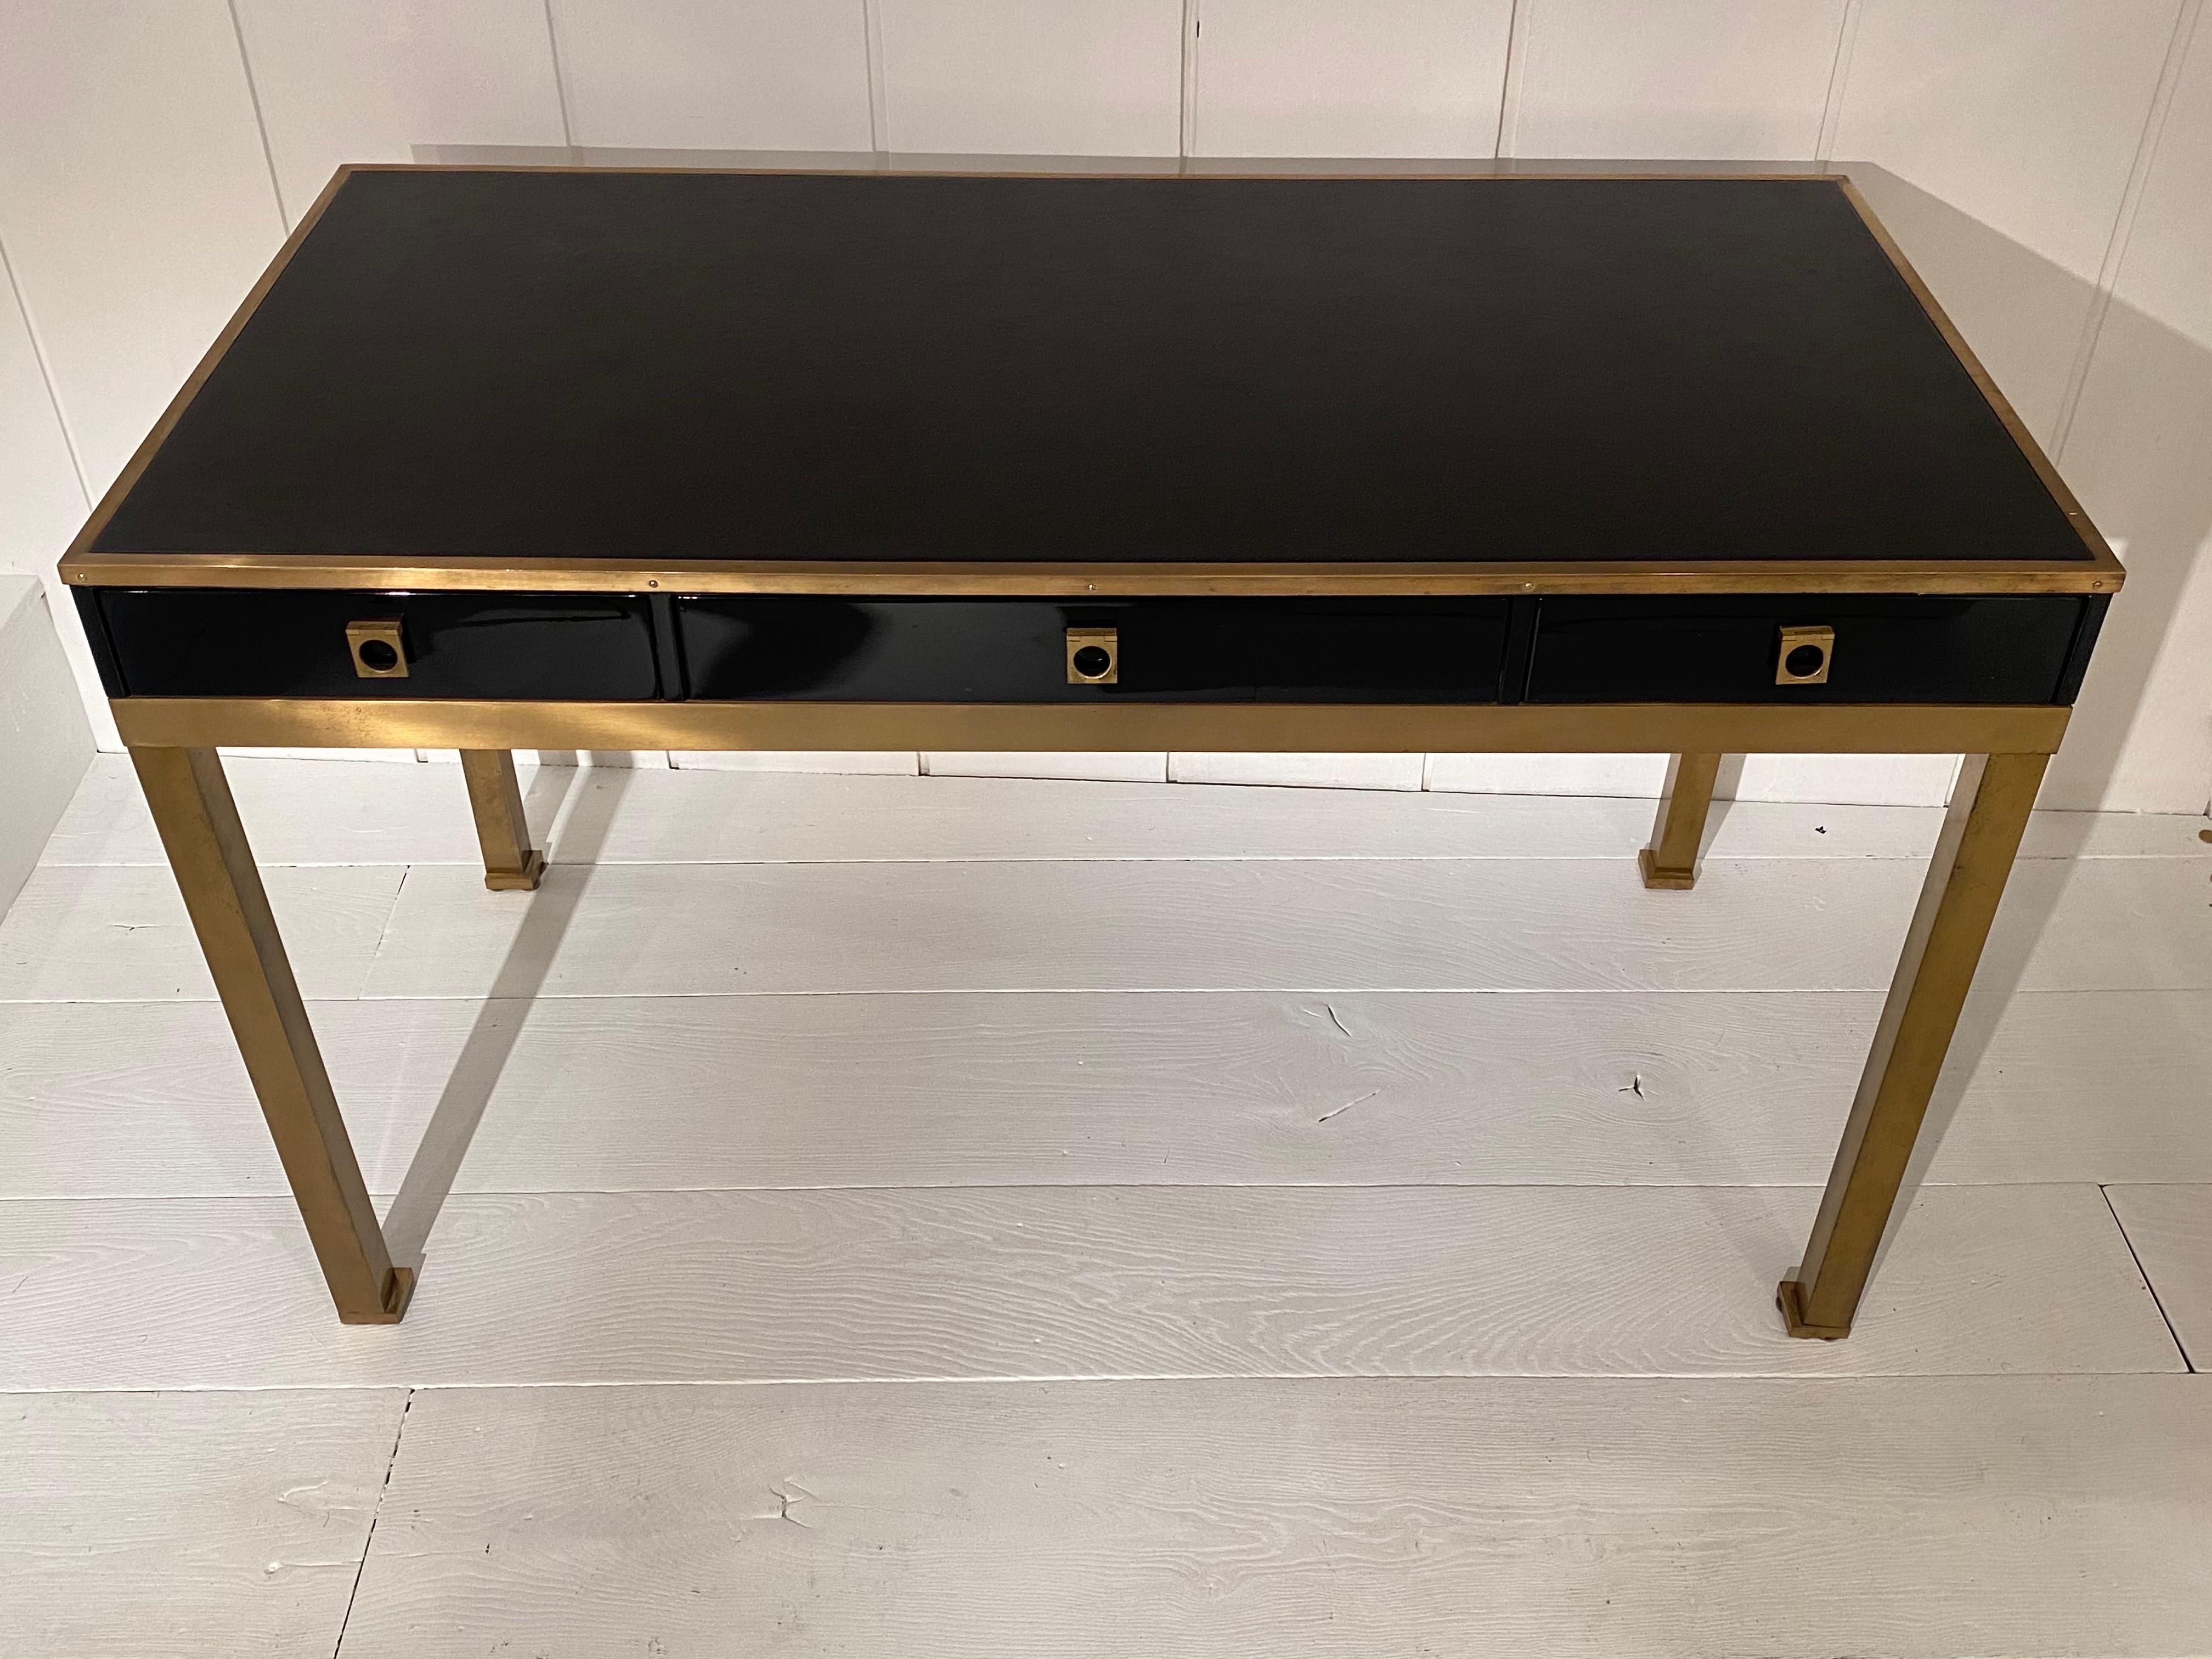 1970s elegant black lacquered and leather top desk by Guy Lefevre for Maison Jansen
Brass feet and handles
Three drawers with wood interior.
good vintage condition.
 